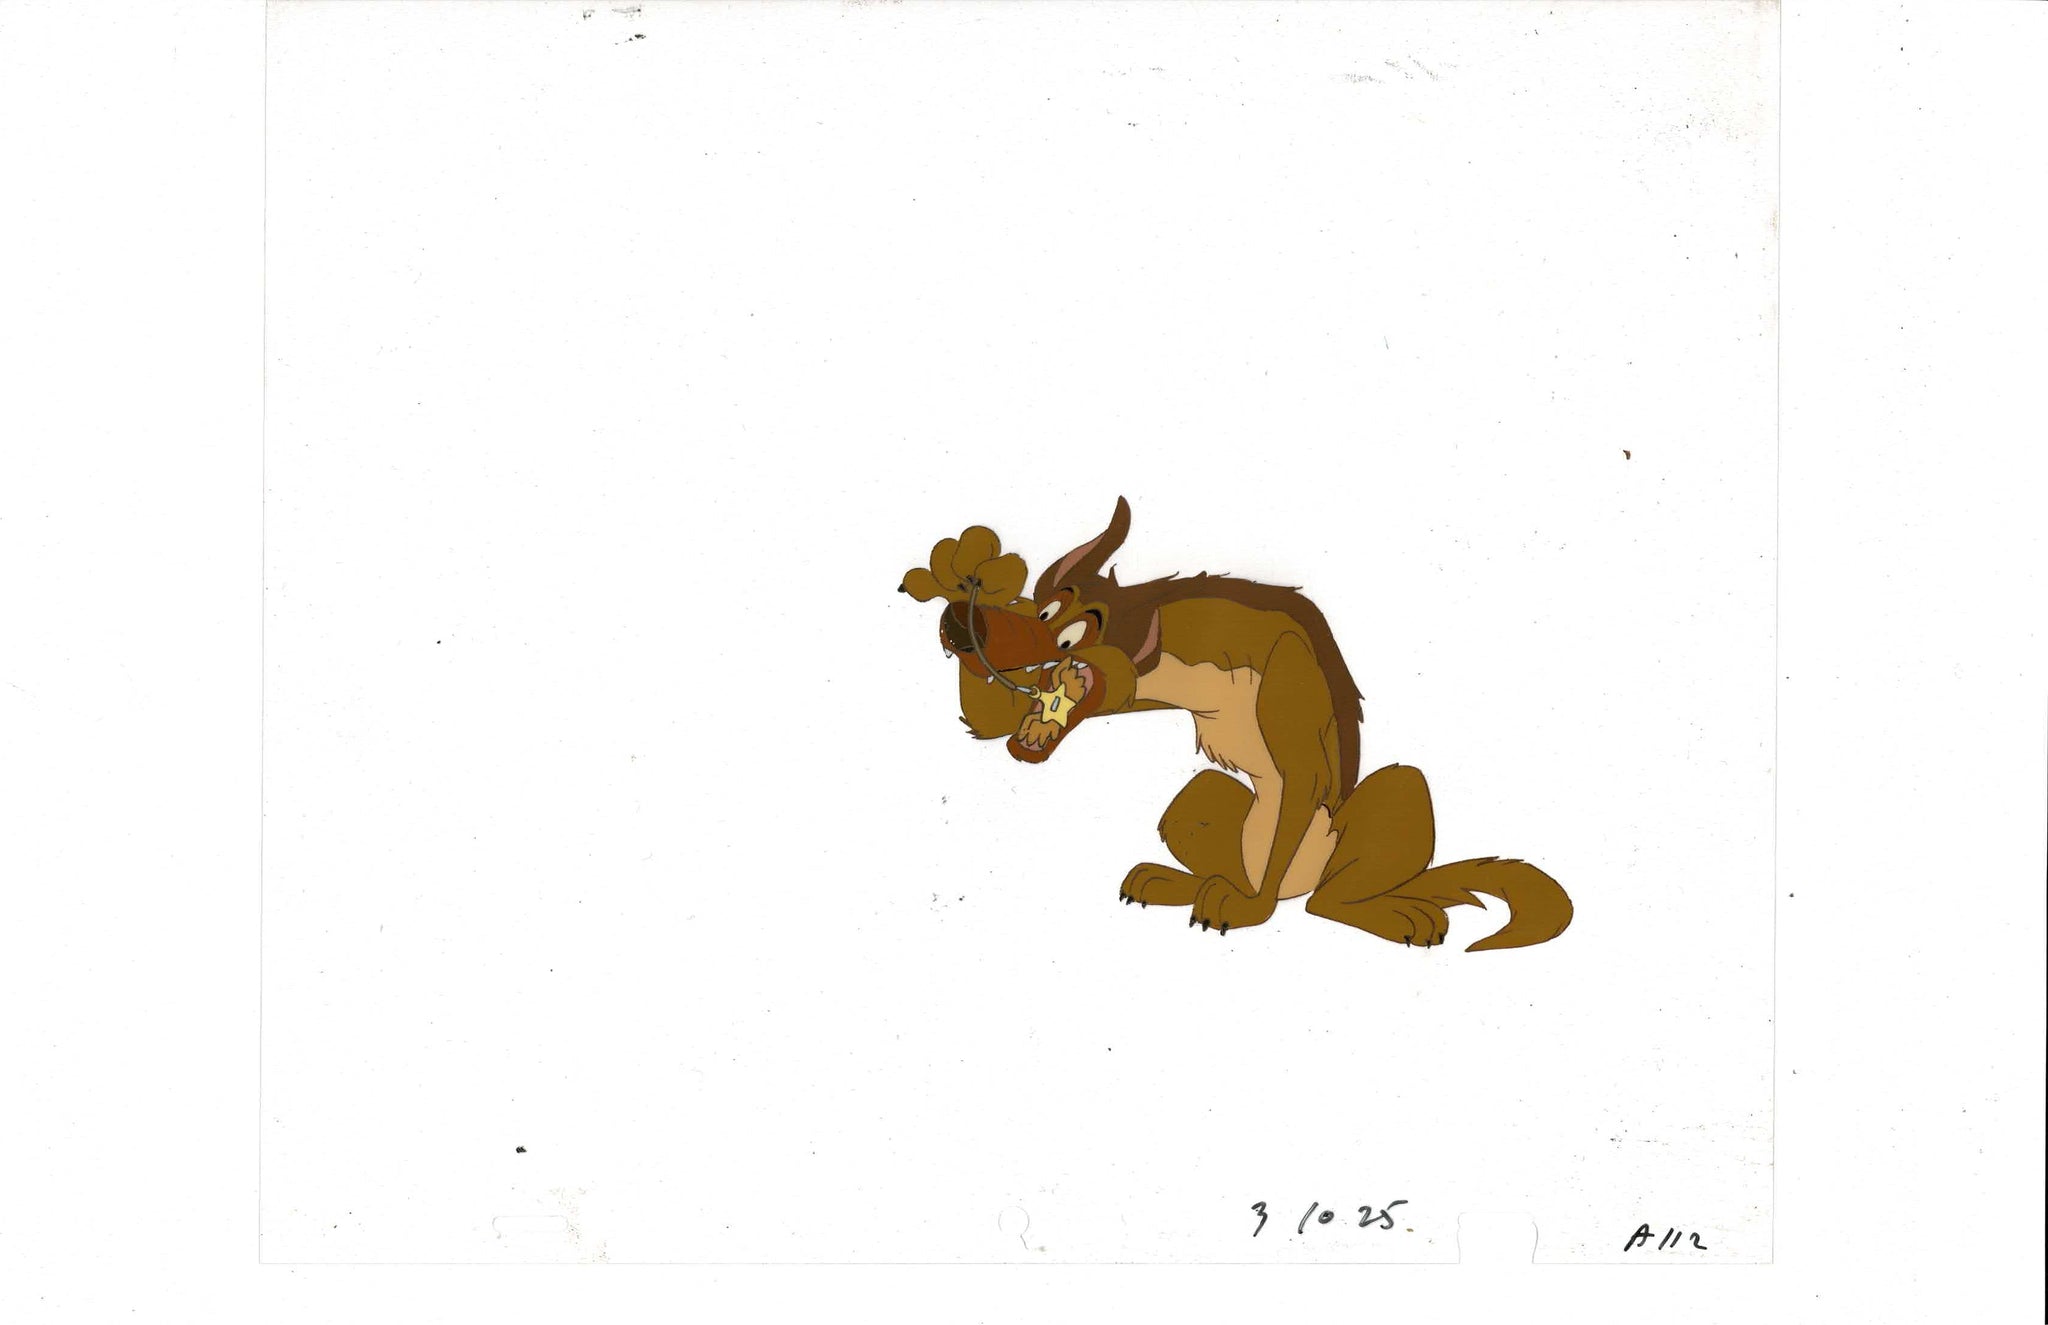 All Dogs go To Heaven cel EX5461 - Animation Legends